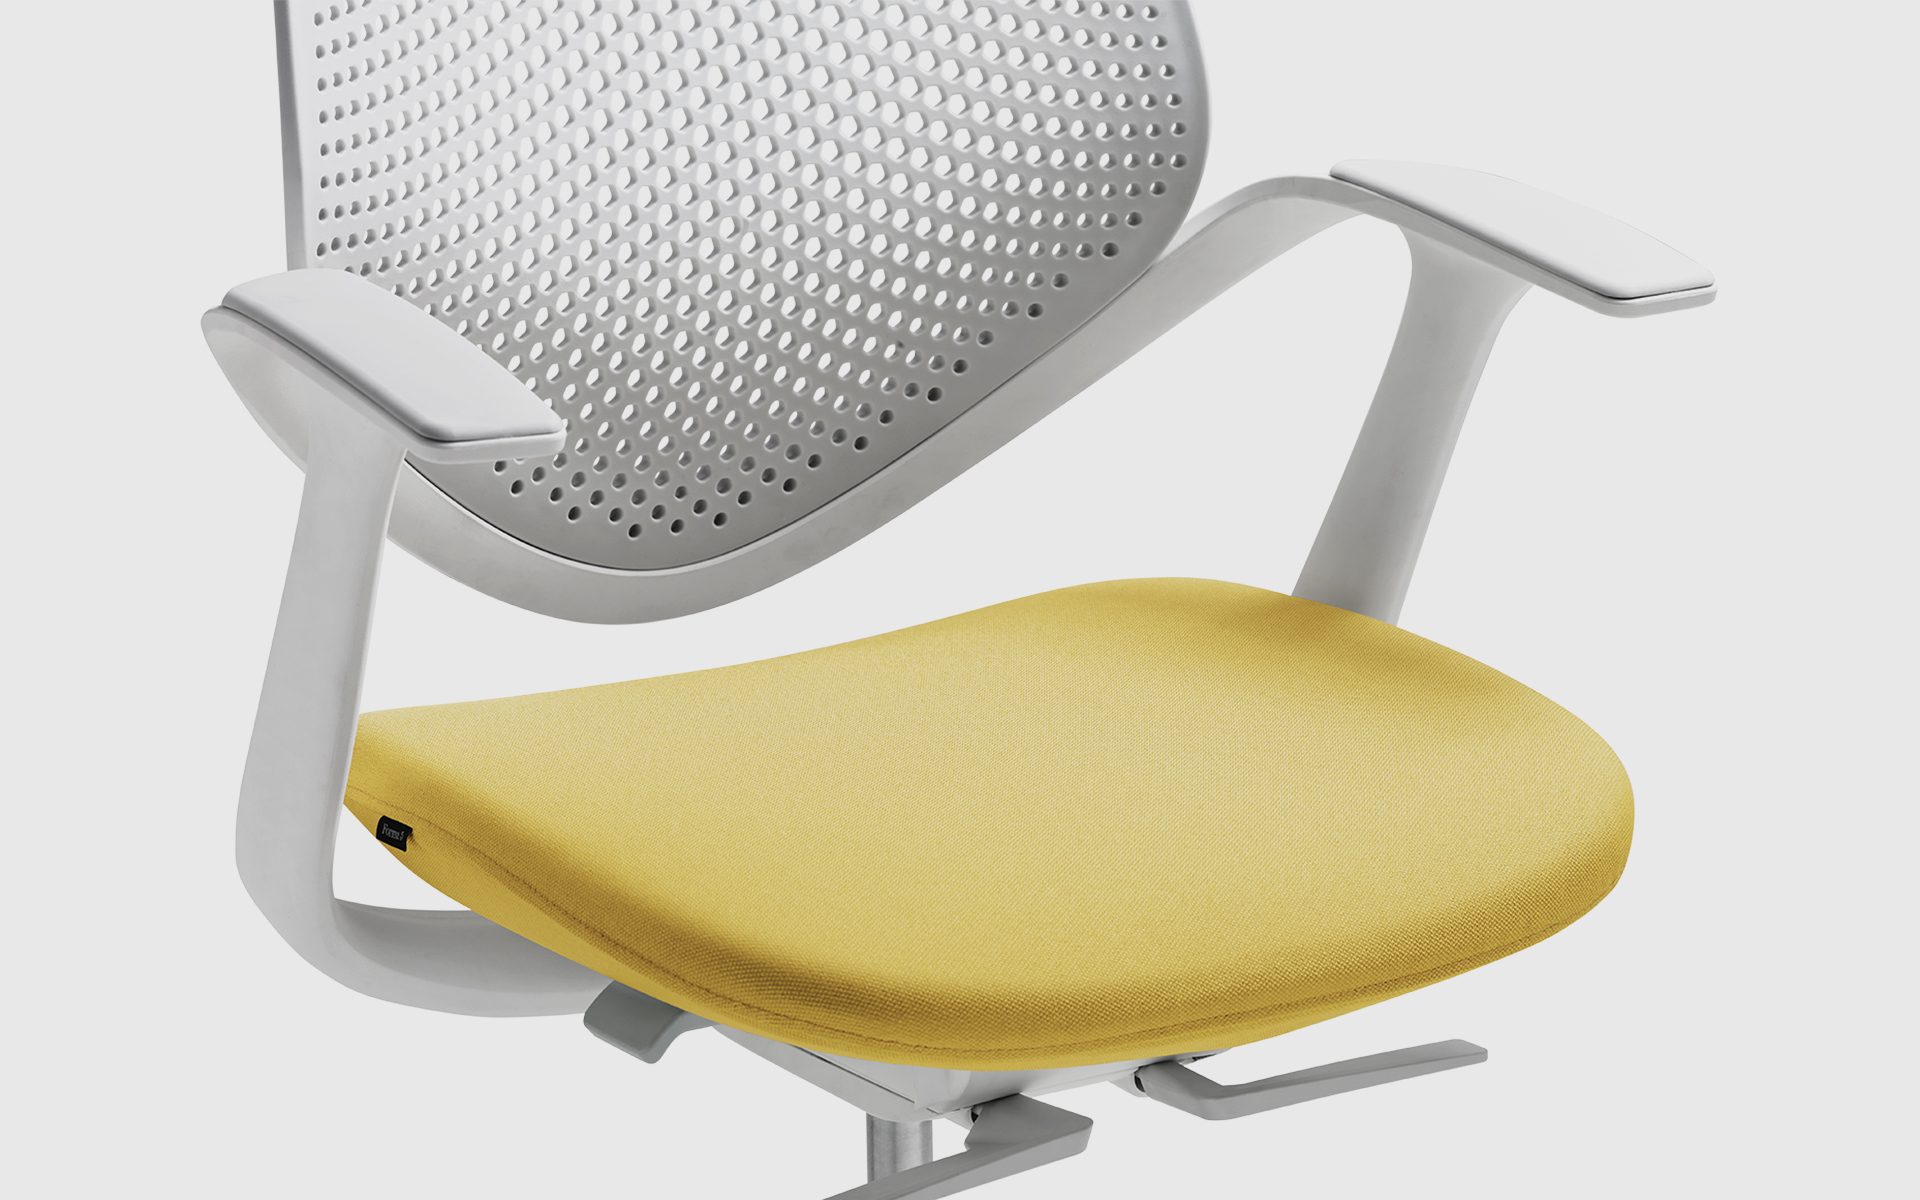 Enlarged partial front view of a Forma 5 Flow office chair by ITO Design with padded seating surface in yellow, back and armrests in white.